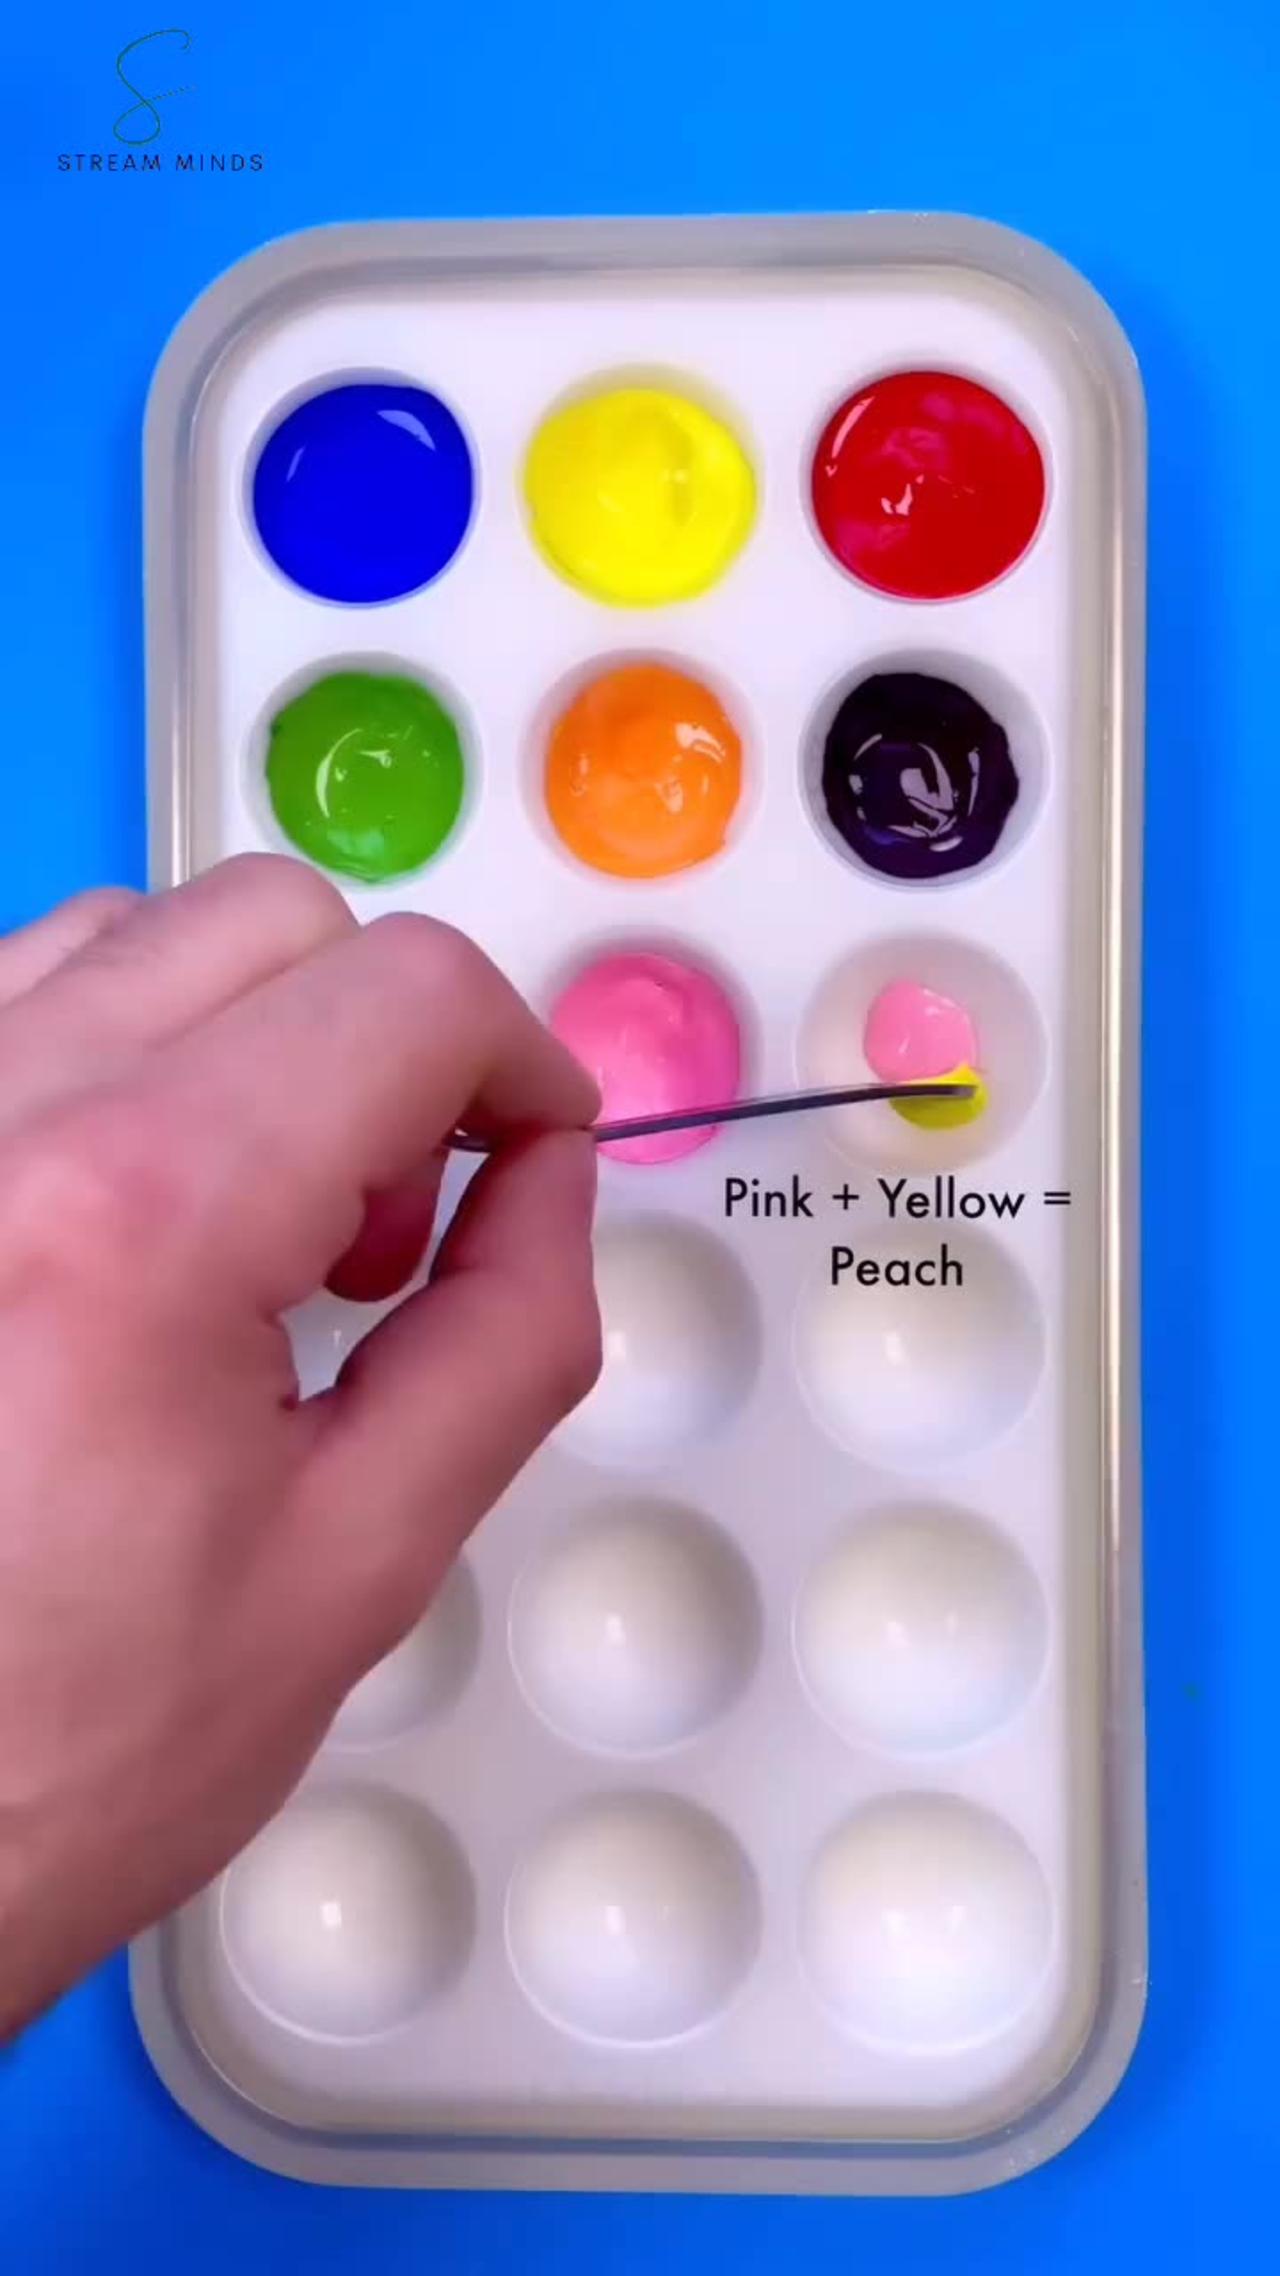 How to make many colors from three colors, Artist, art and craft, colour tricks, amazing tricks